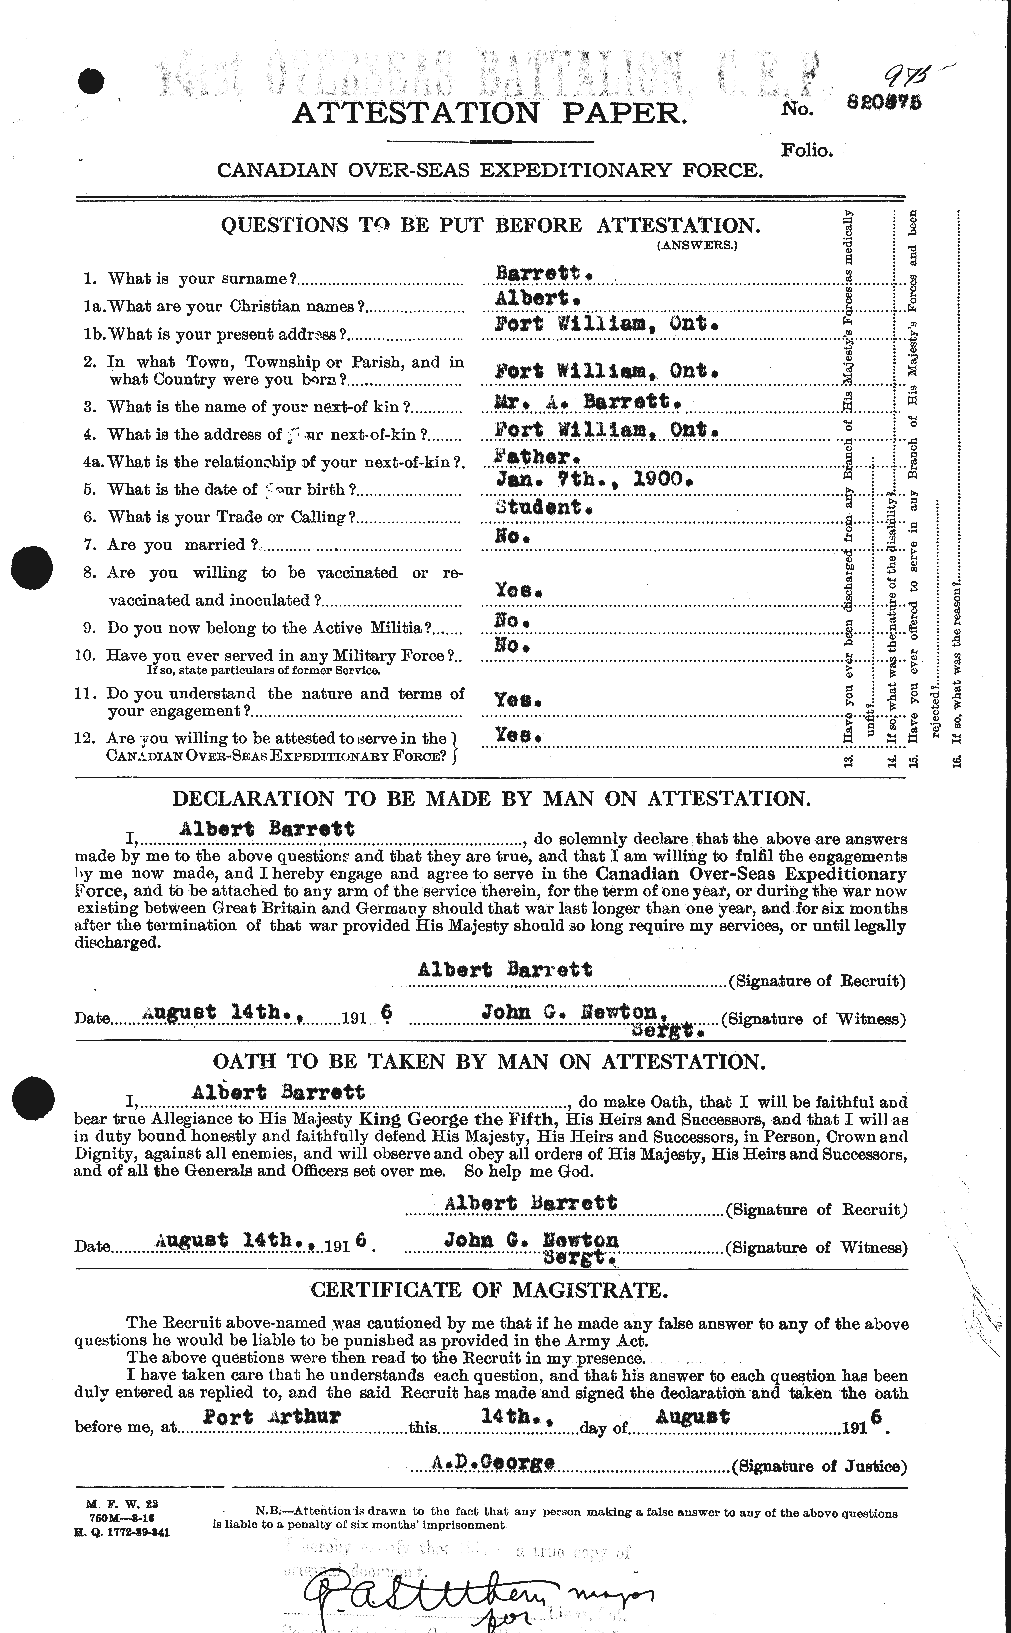 Personnel Records of the First World War - CEF 222210a